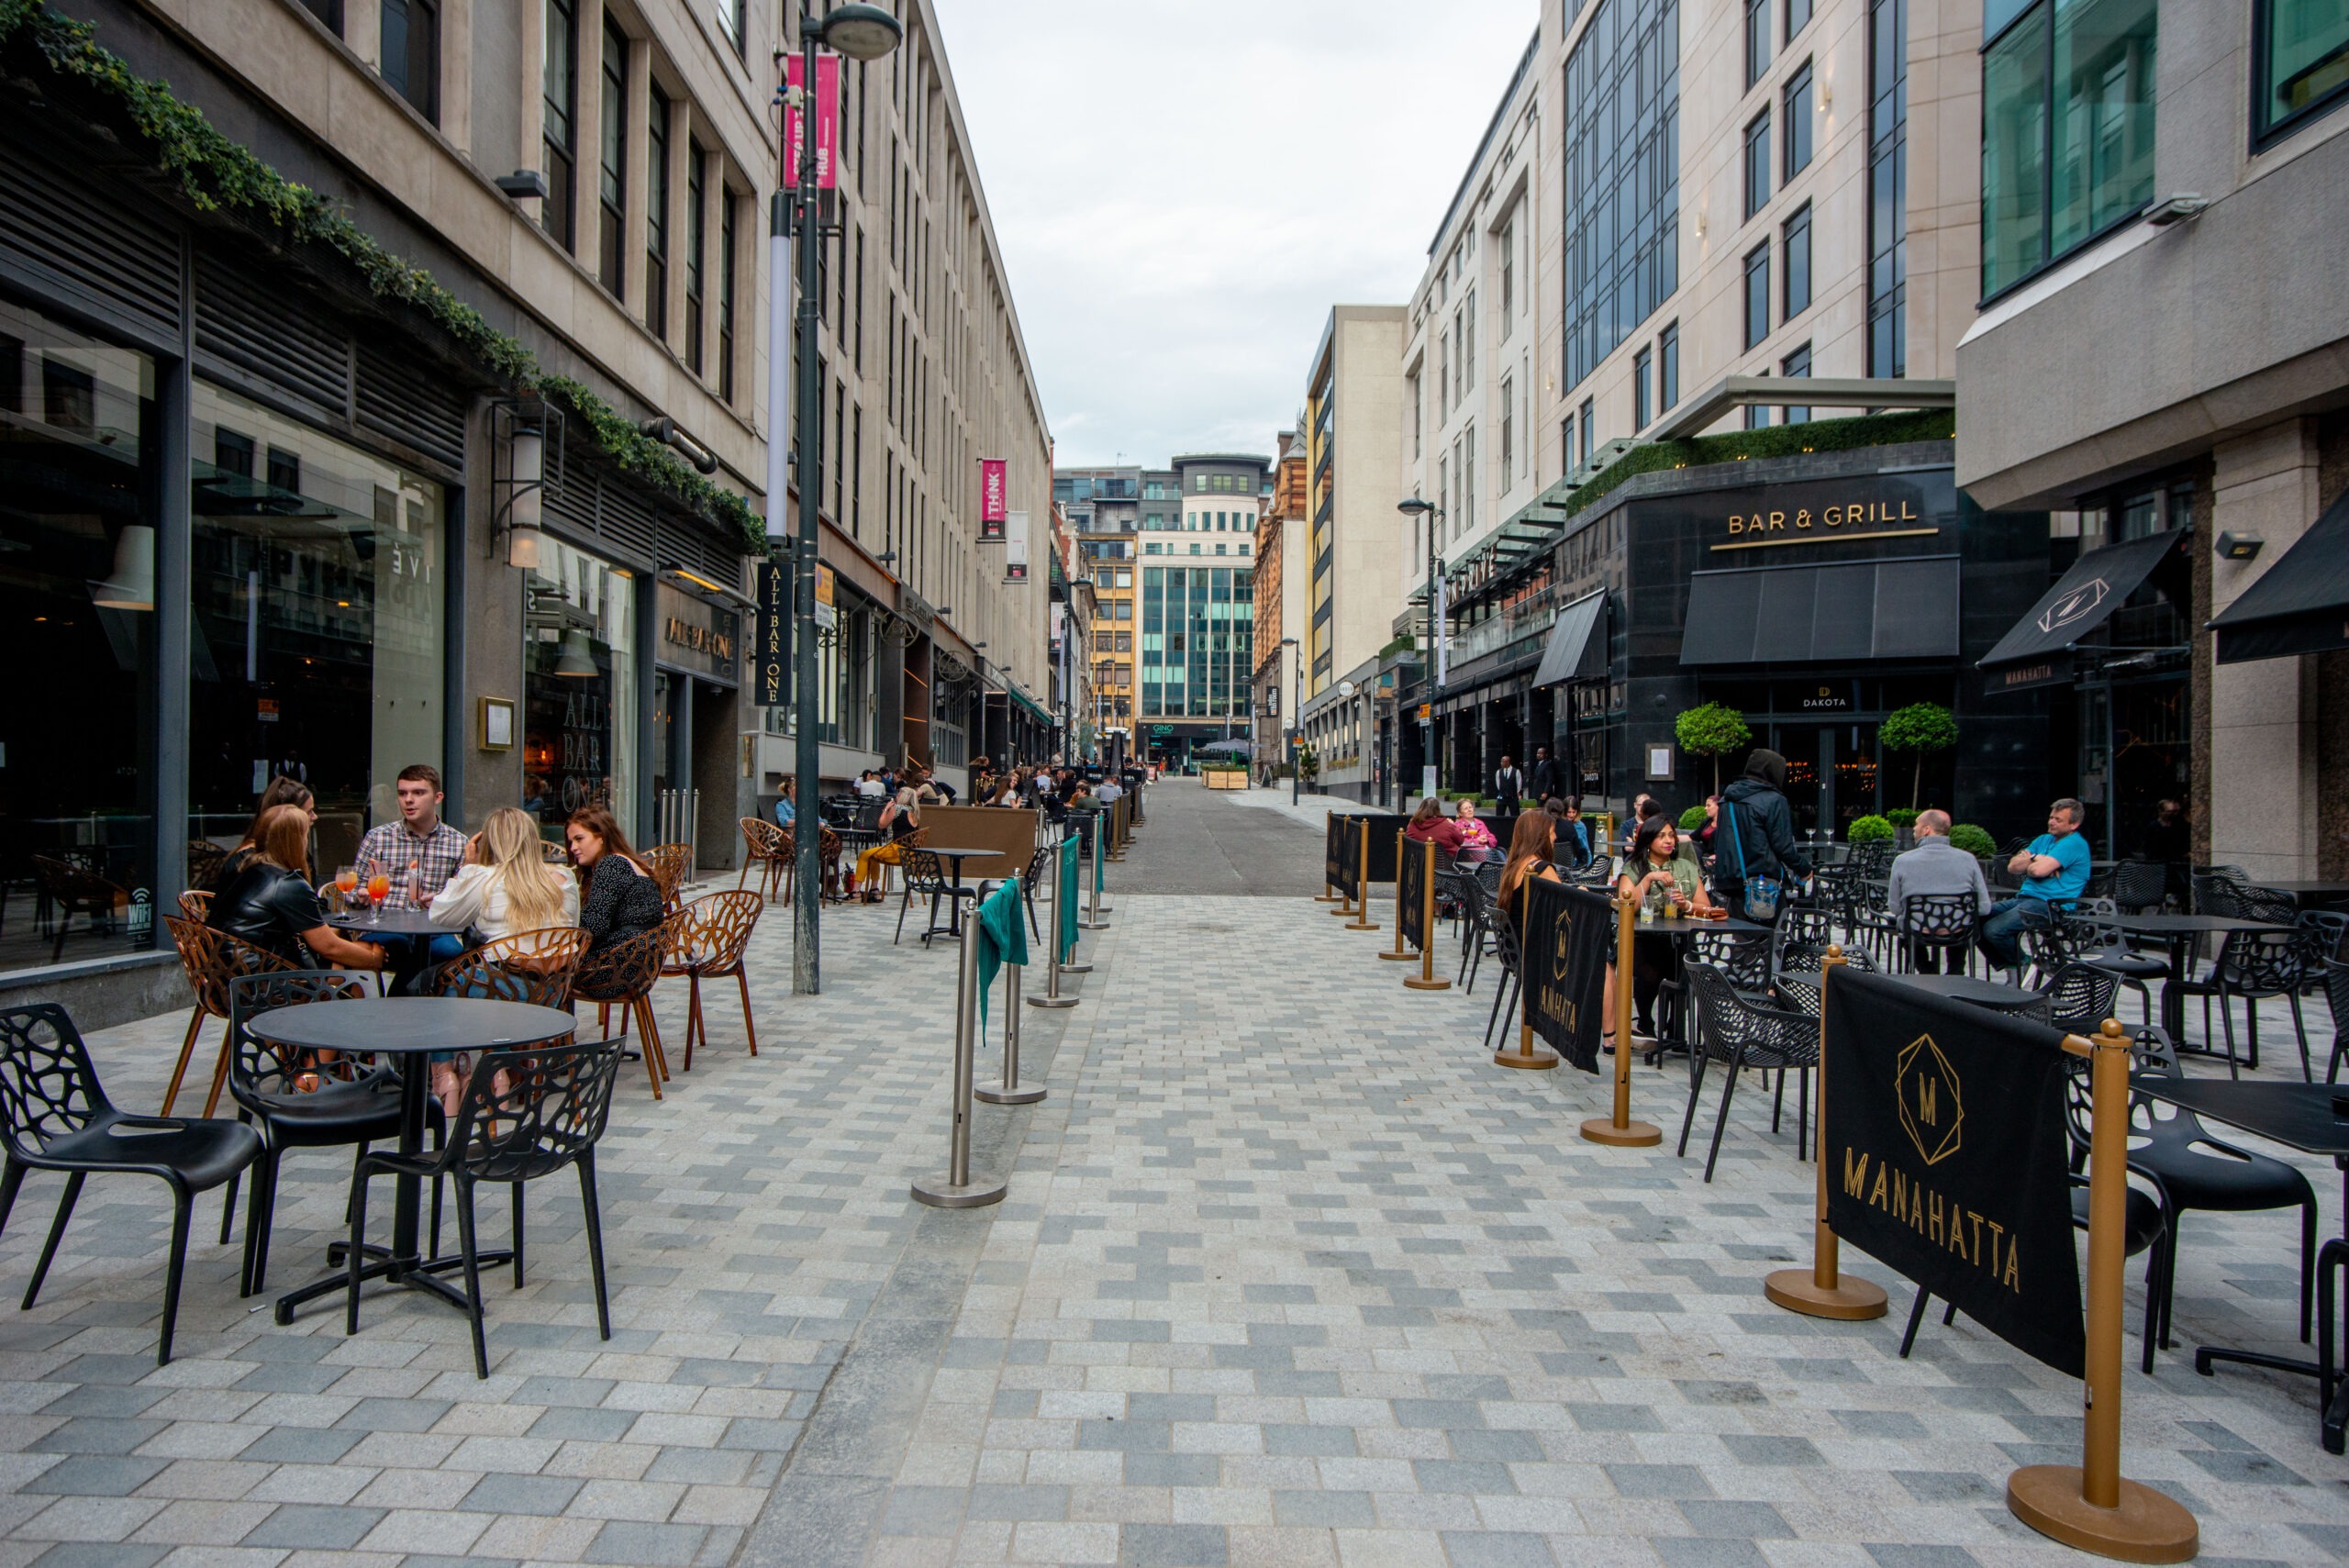 An image of the pedestrianised Greek Street in Leeds City Centre - shot from the Manahatta end